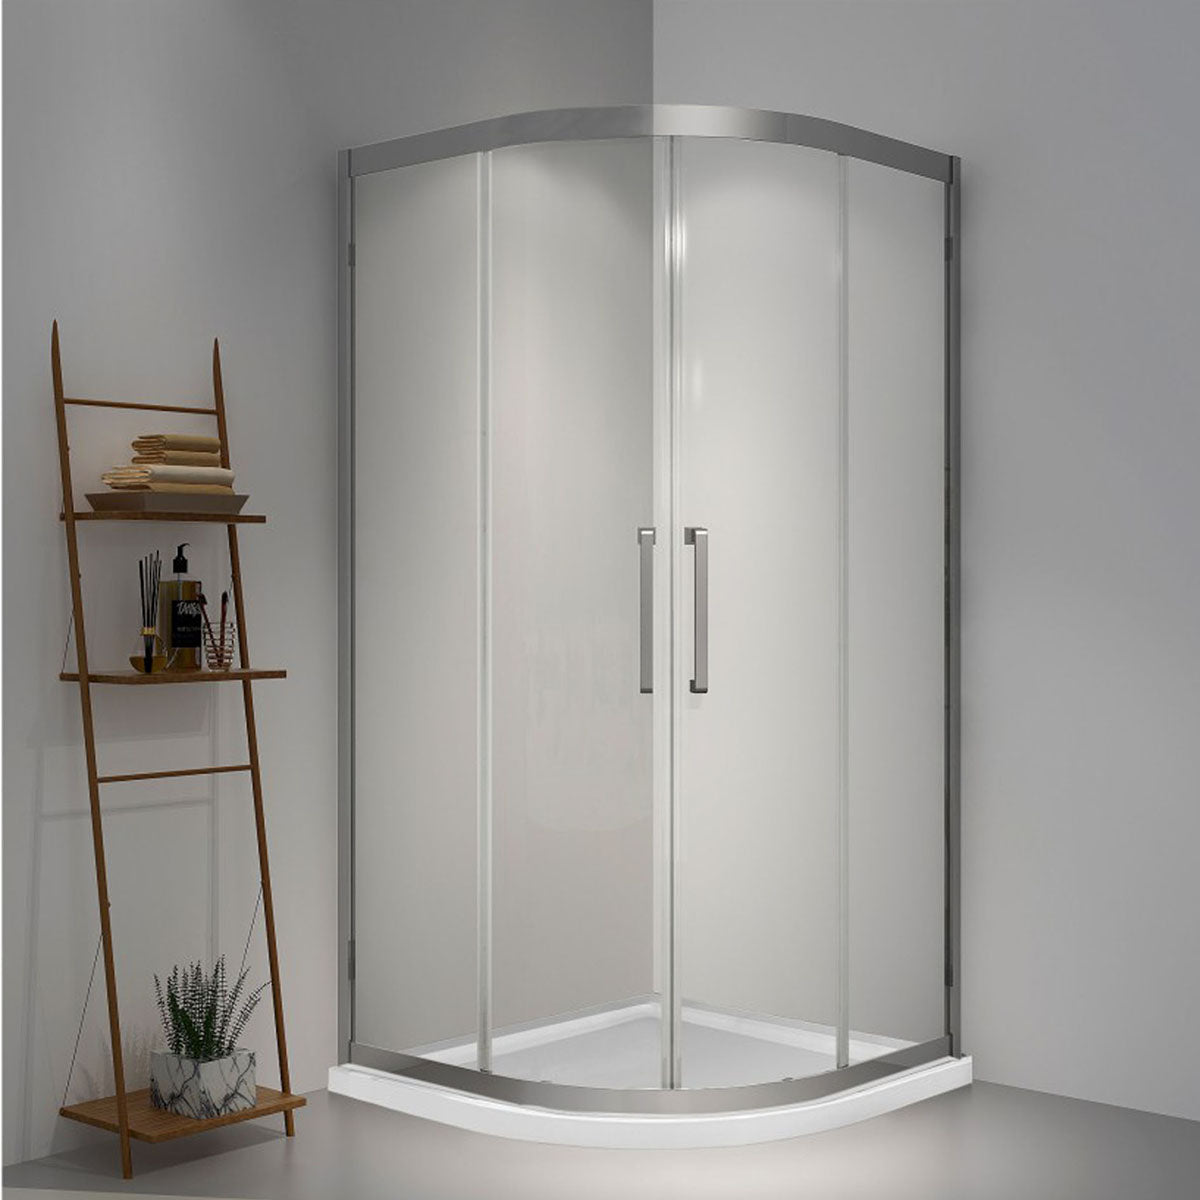 N06 Stacey Neo Round Bypass Corner Shower Door with Klearteck Treatment (5/16" Thickness) (Chrome) - iStyle Bath